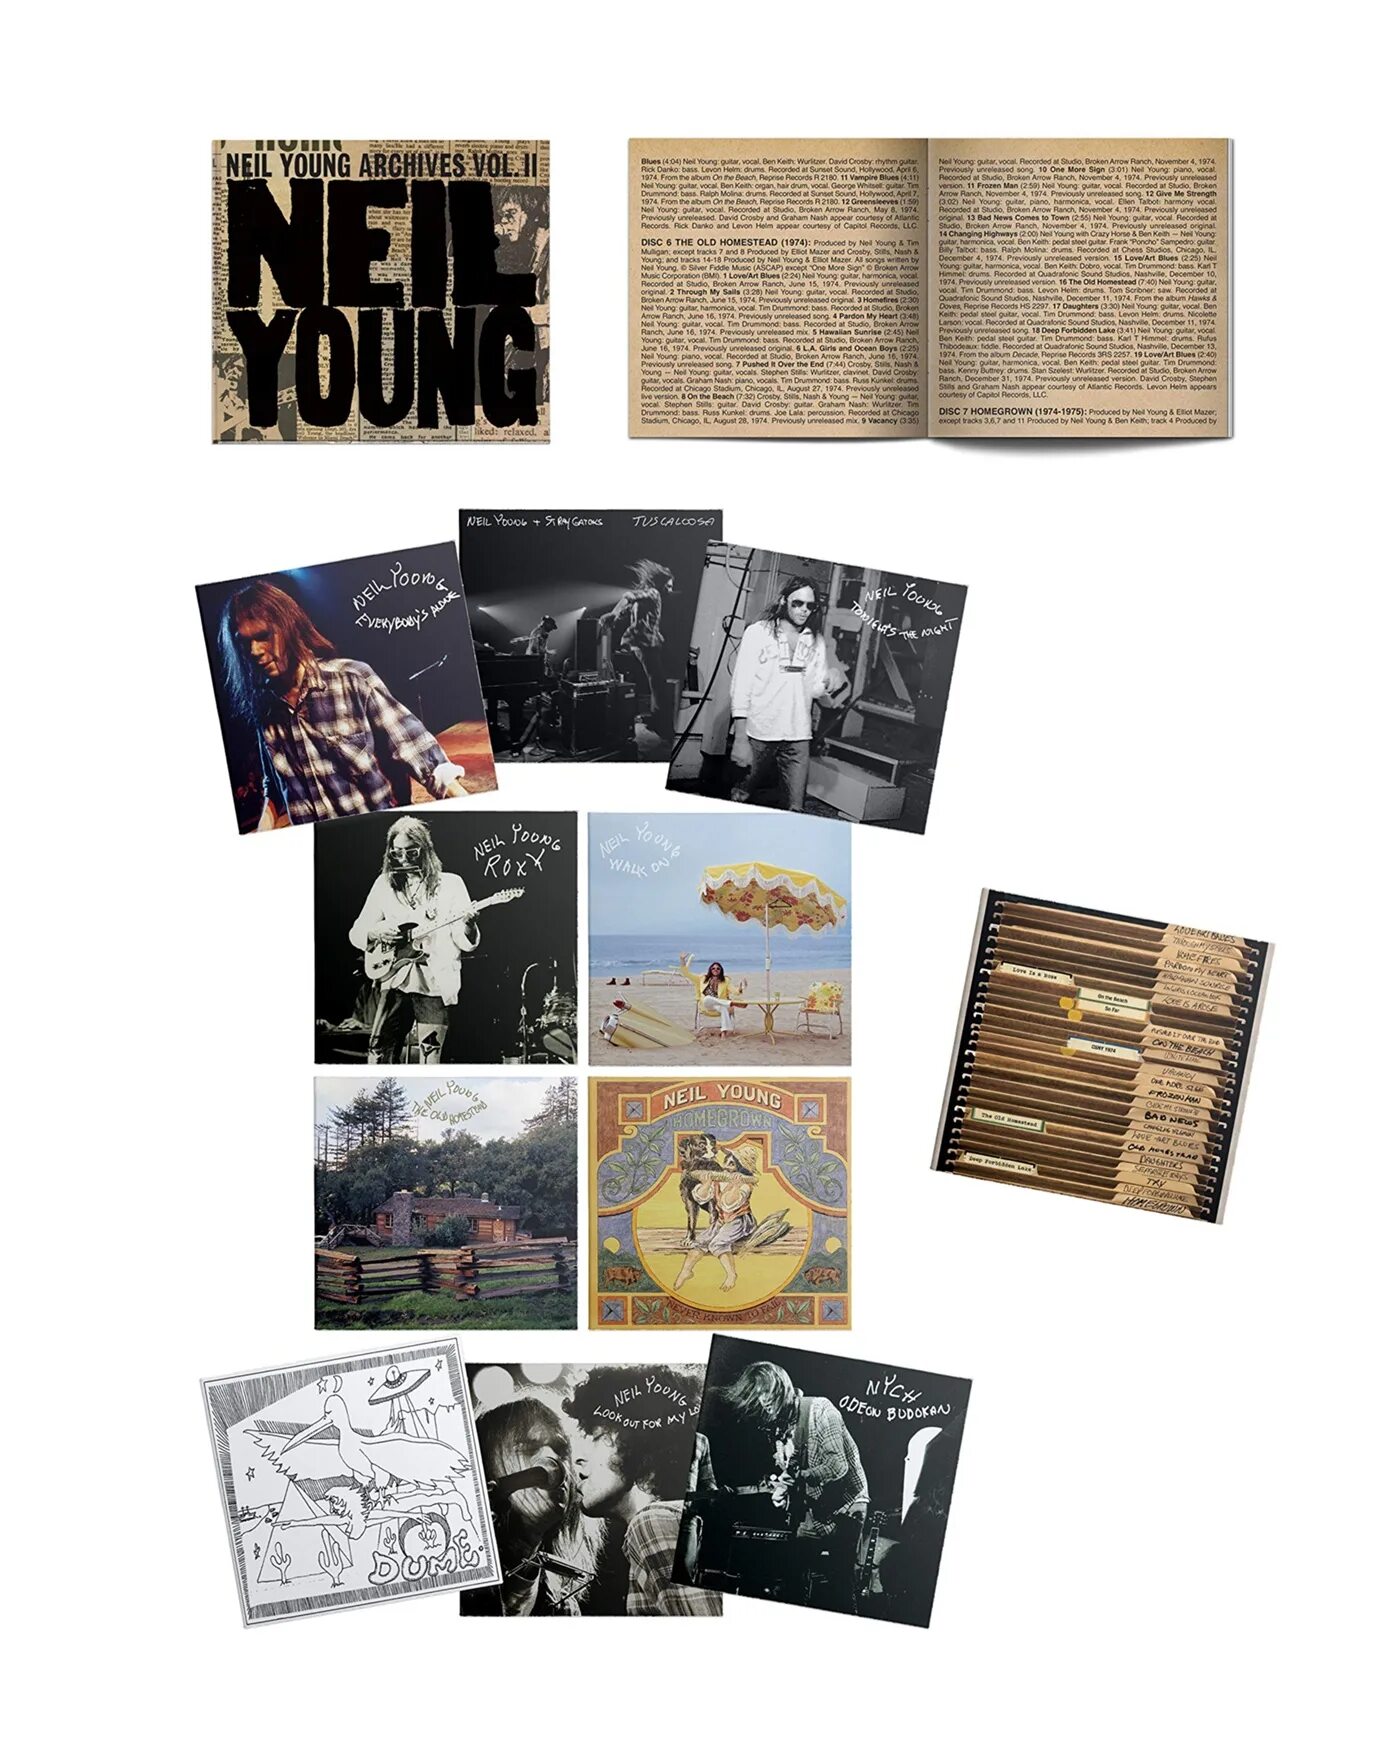 Archive молодой. Neil young 1972. Neil young Colorado. Colorado (Neil young album). Neil young Mirrorball Grey LP.